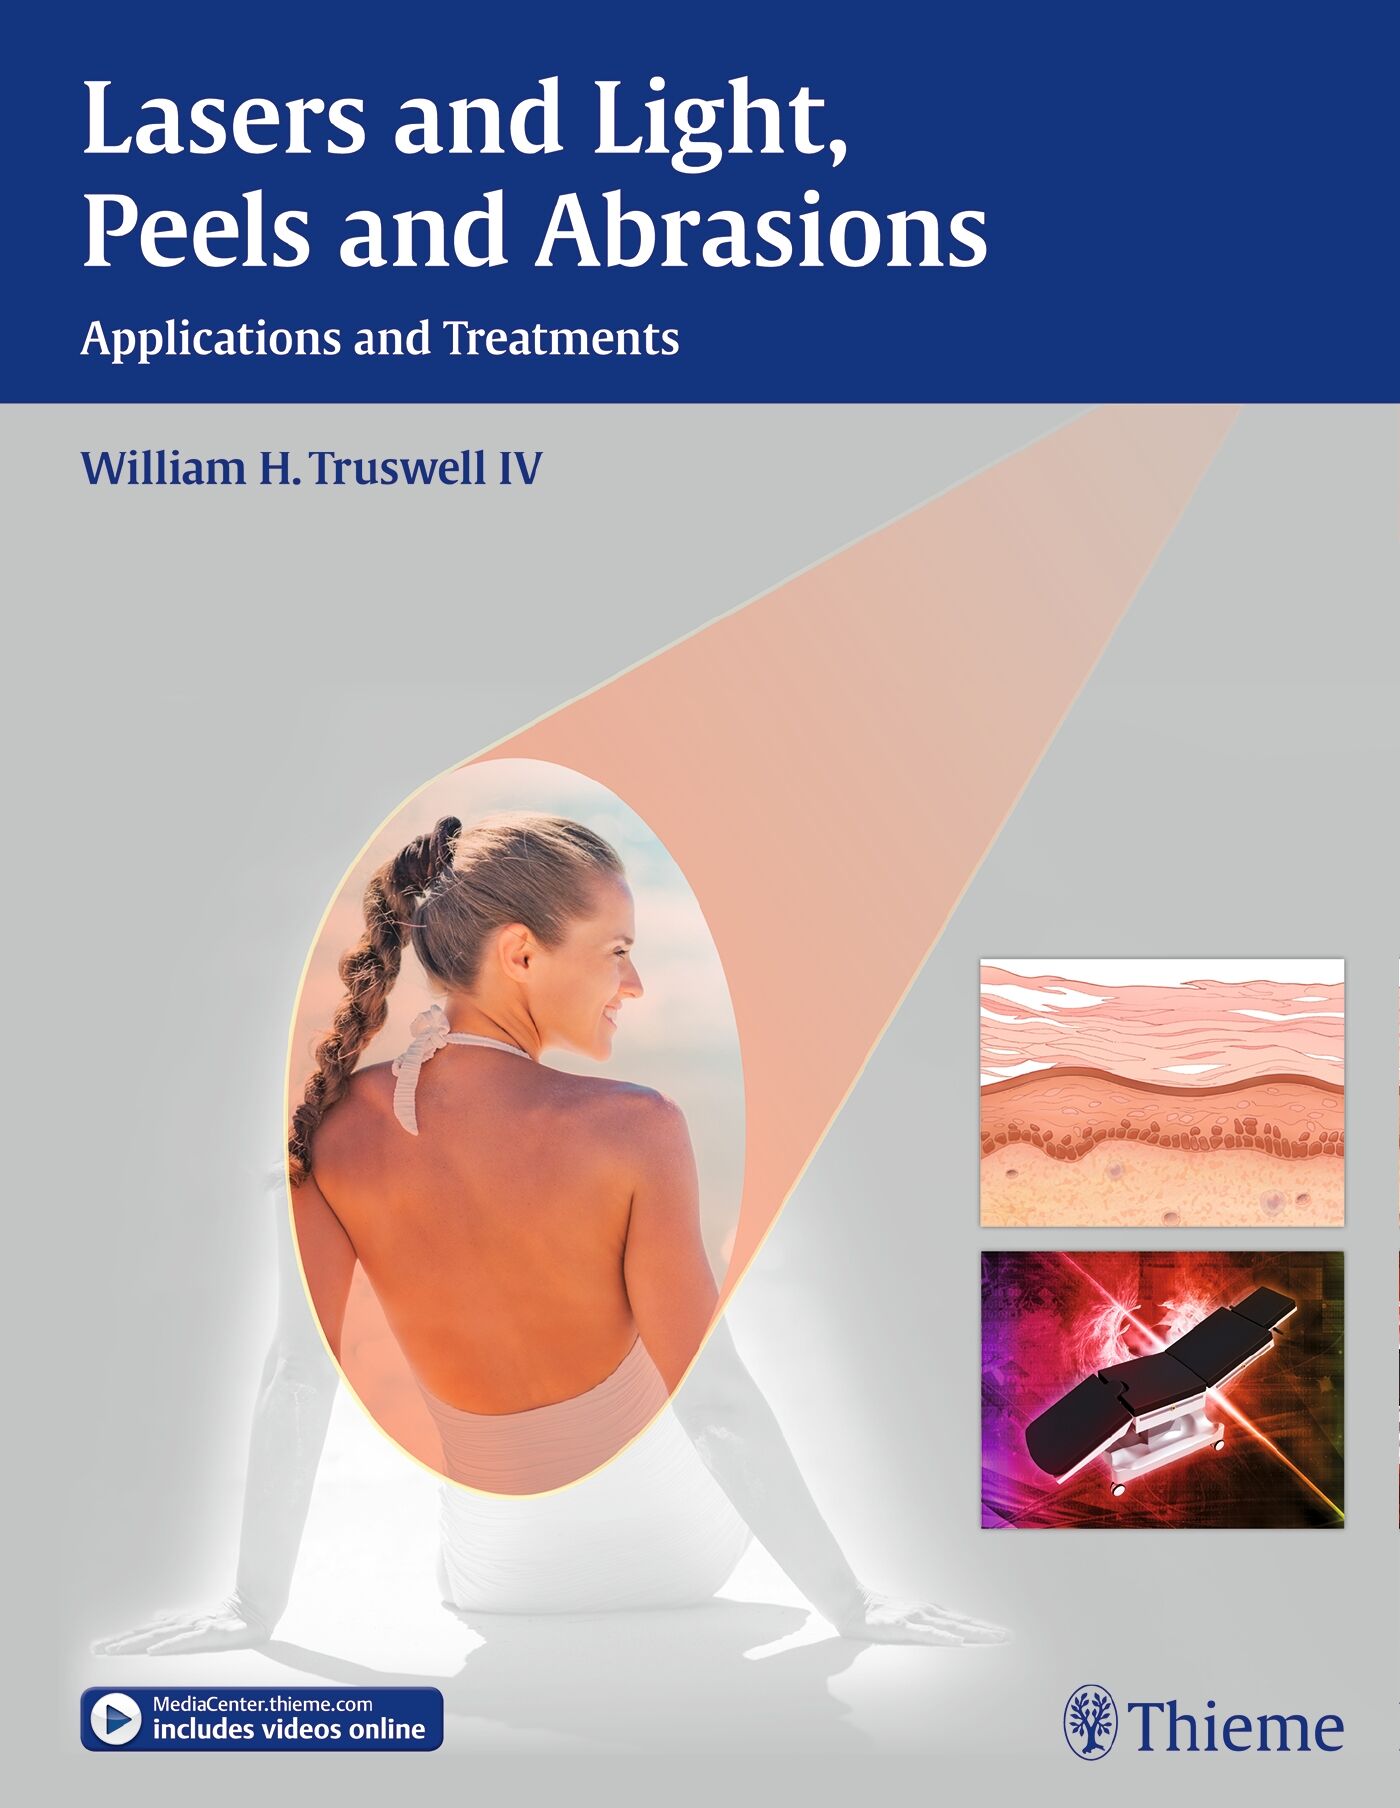 Lasers and Light, Peels and Abrasions, 9781626230019